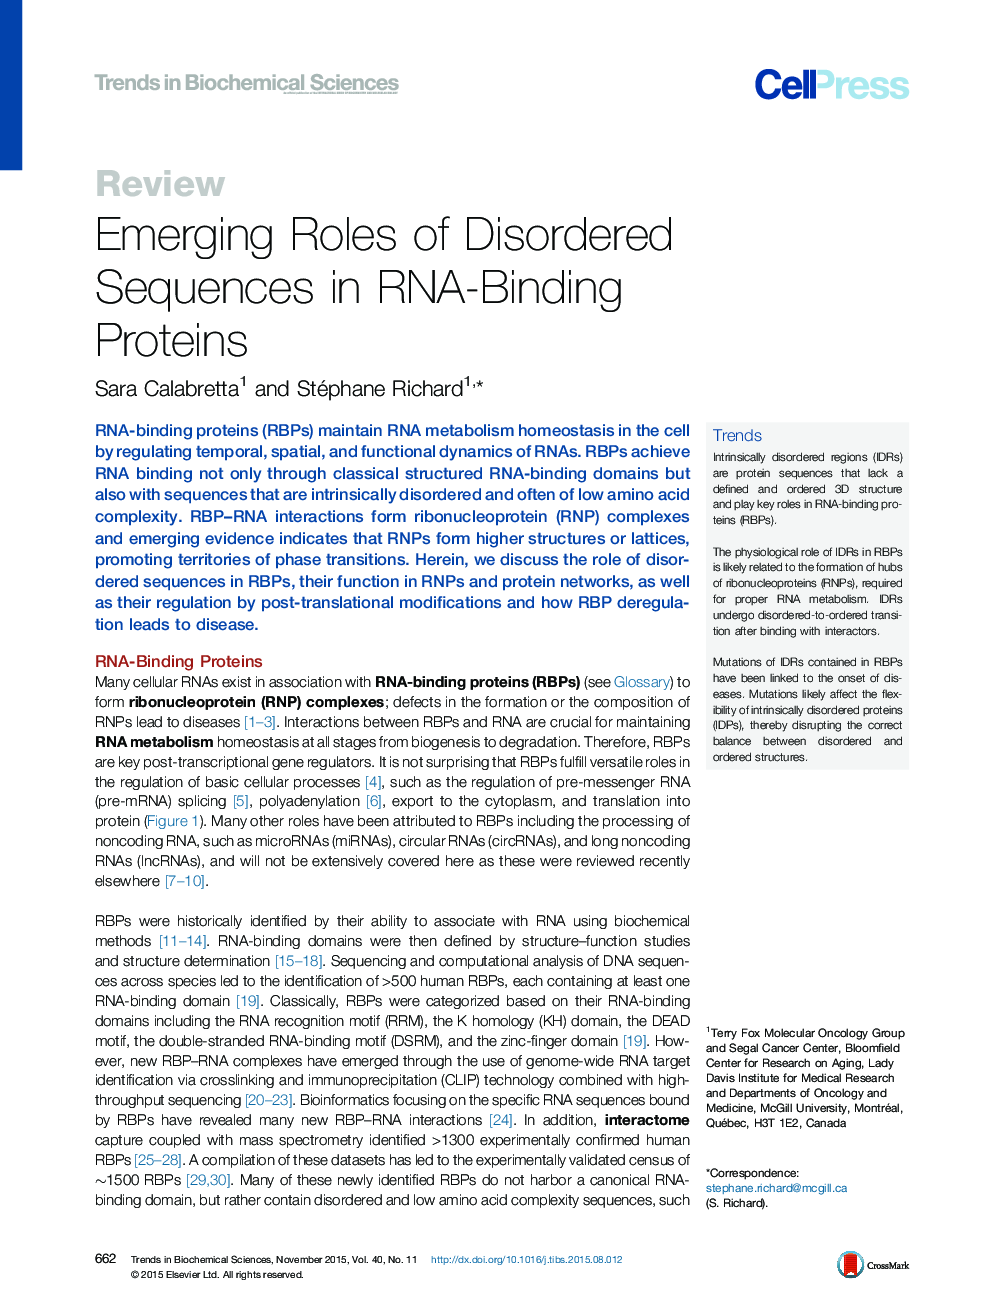 Emerging Roles of Disordered Sequences in RNA-Binding Proteins